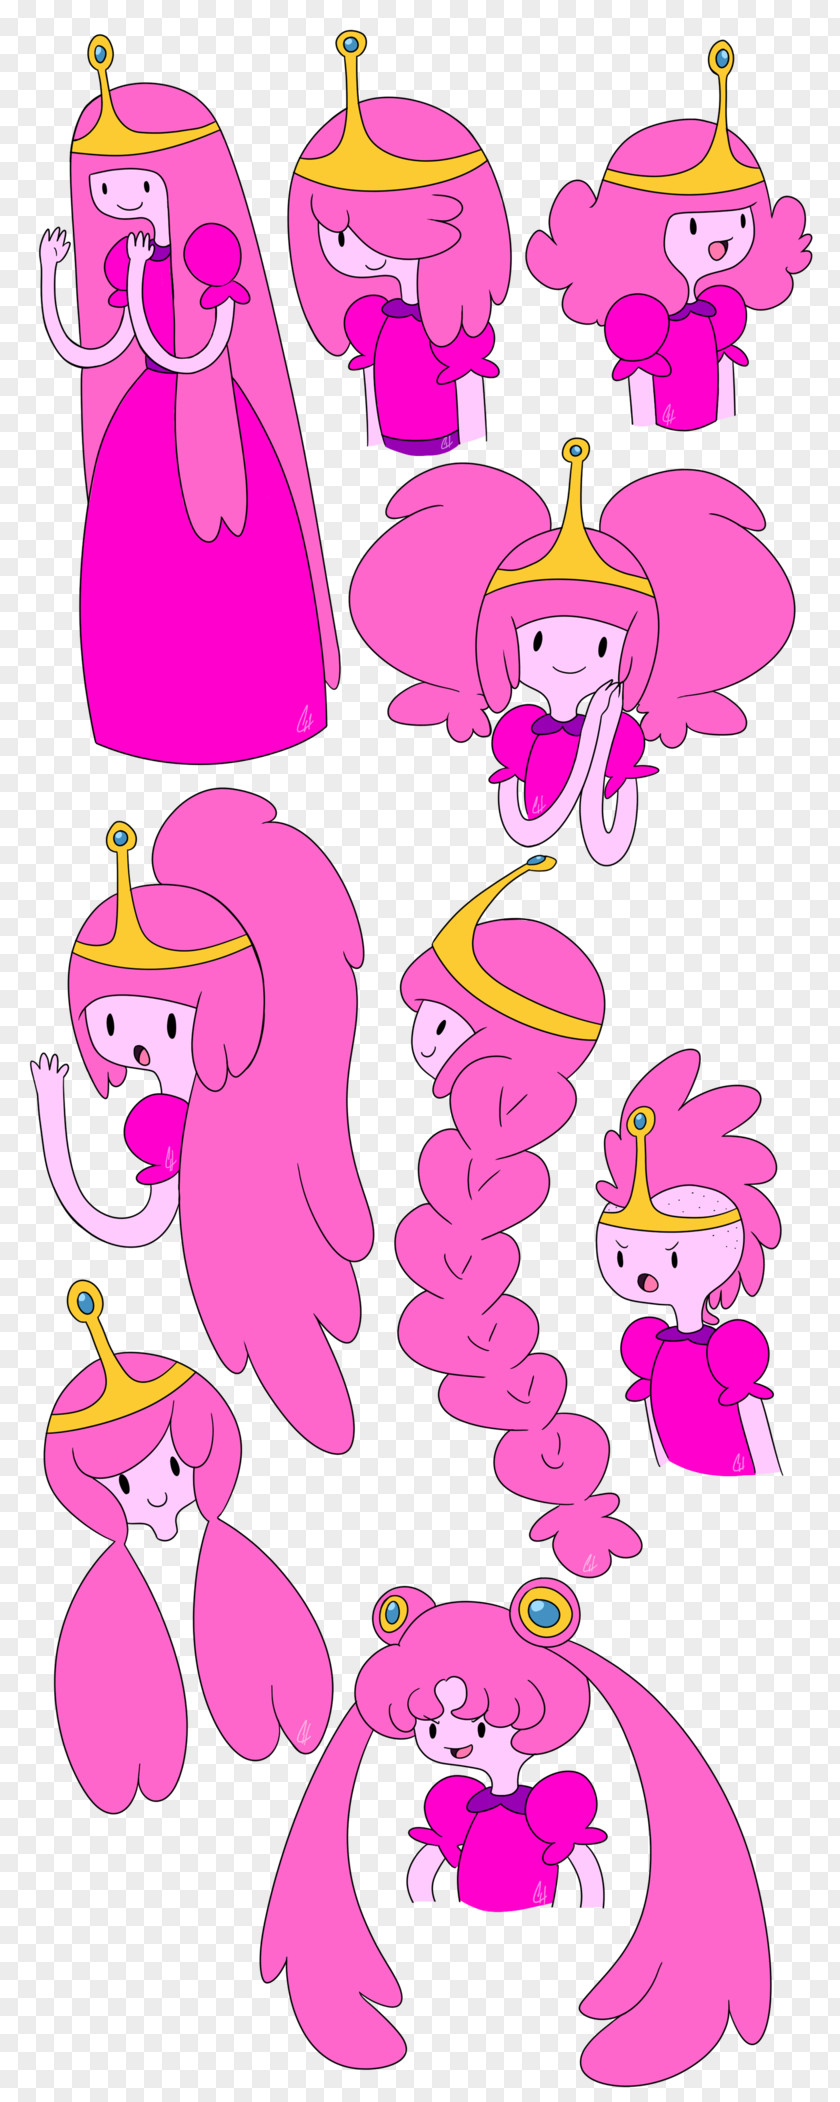 Chewing Gum Princess Bubblegum Hairstyle Character Fan Art PNG